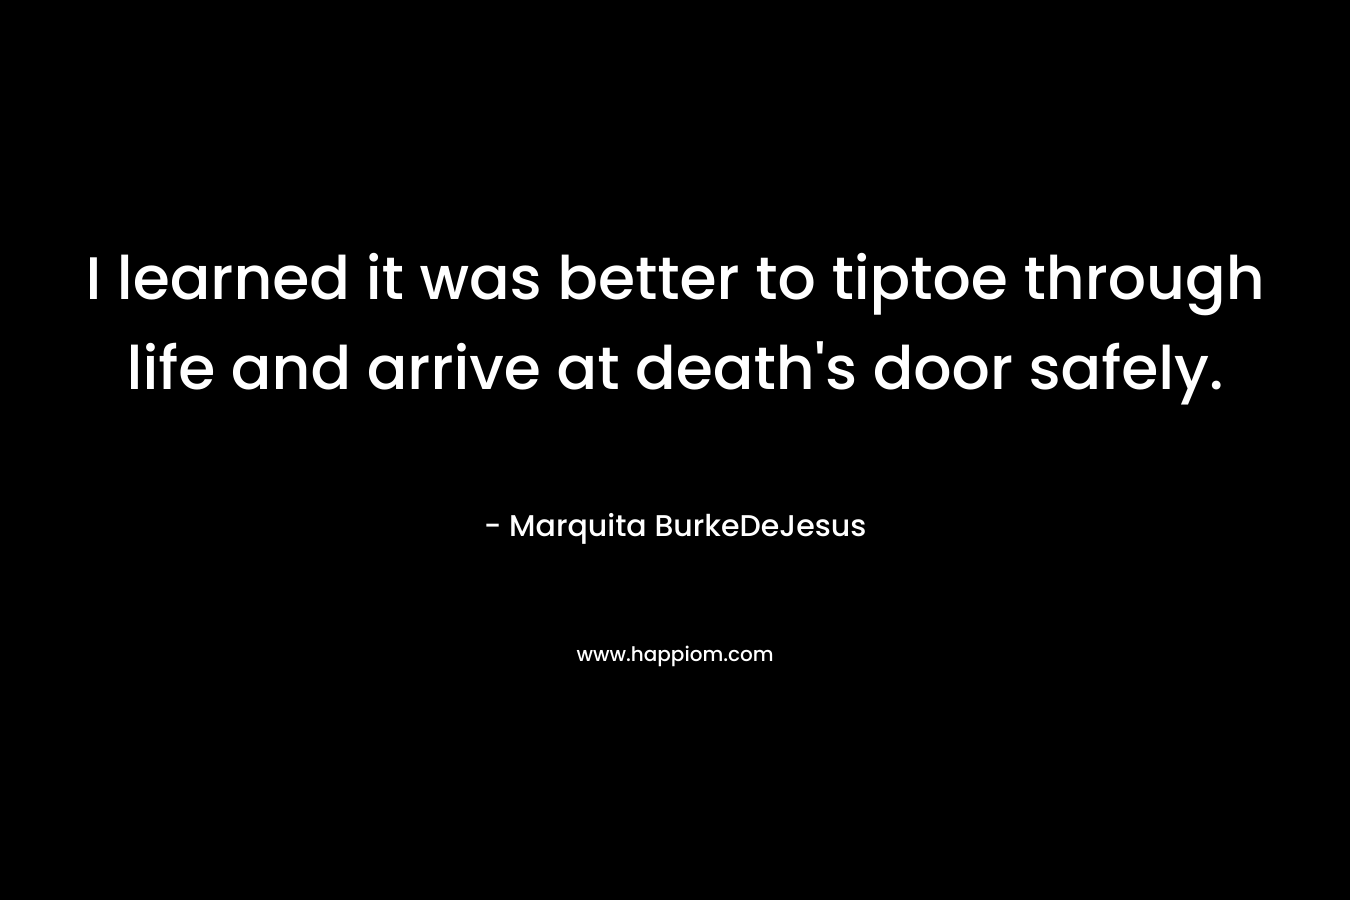 I learned it was better to tiptoe through life and arrive at death’s door safely. – Marquita BurkeDeJesus